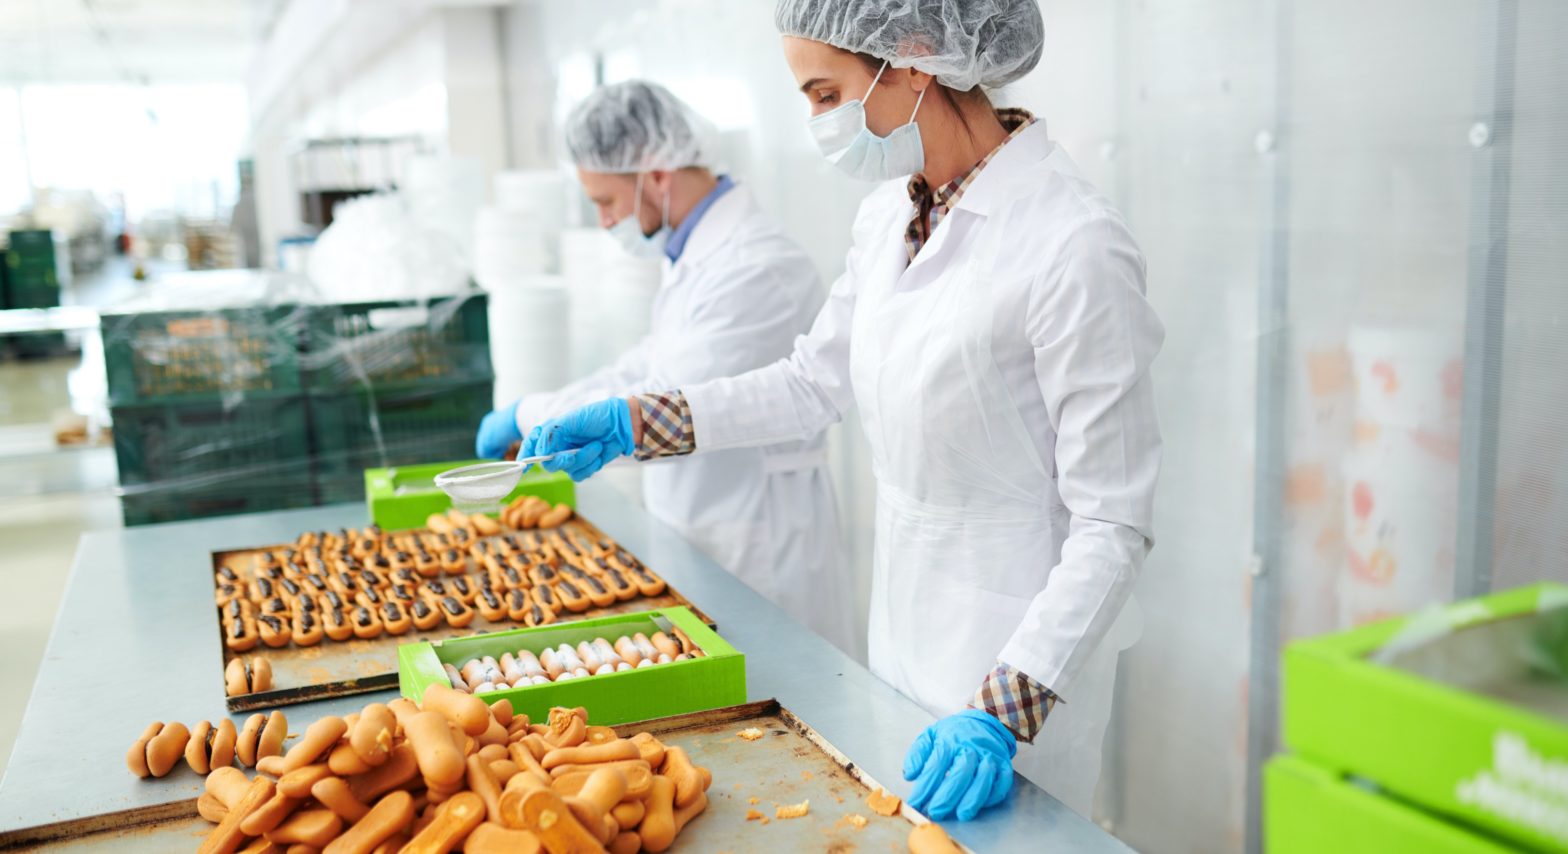 Two food manufacturing employees in white lab coats, gloves, hair nets, and masks, assembling food on an assembly line